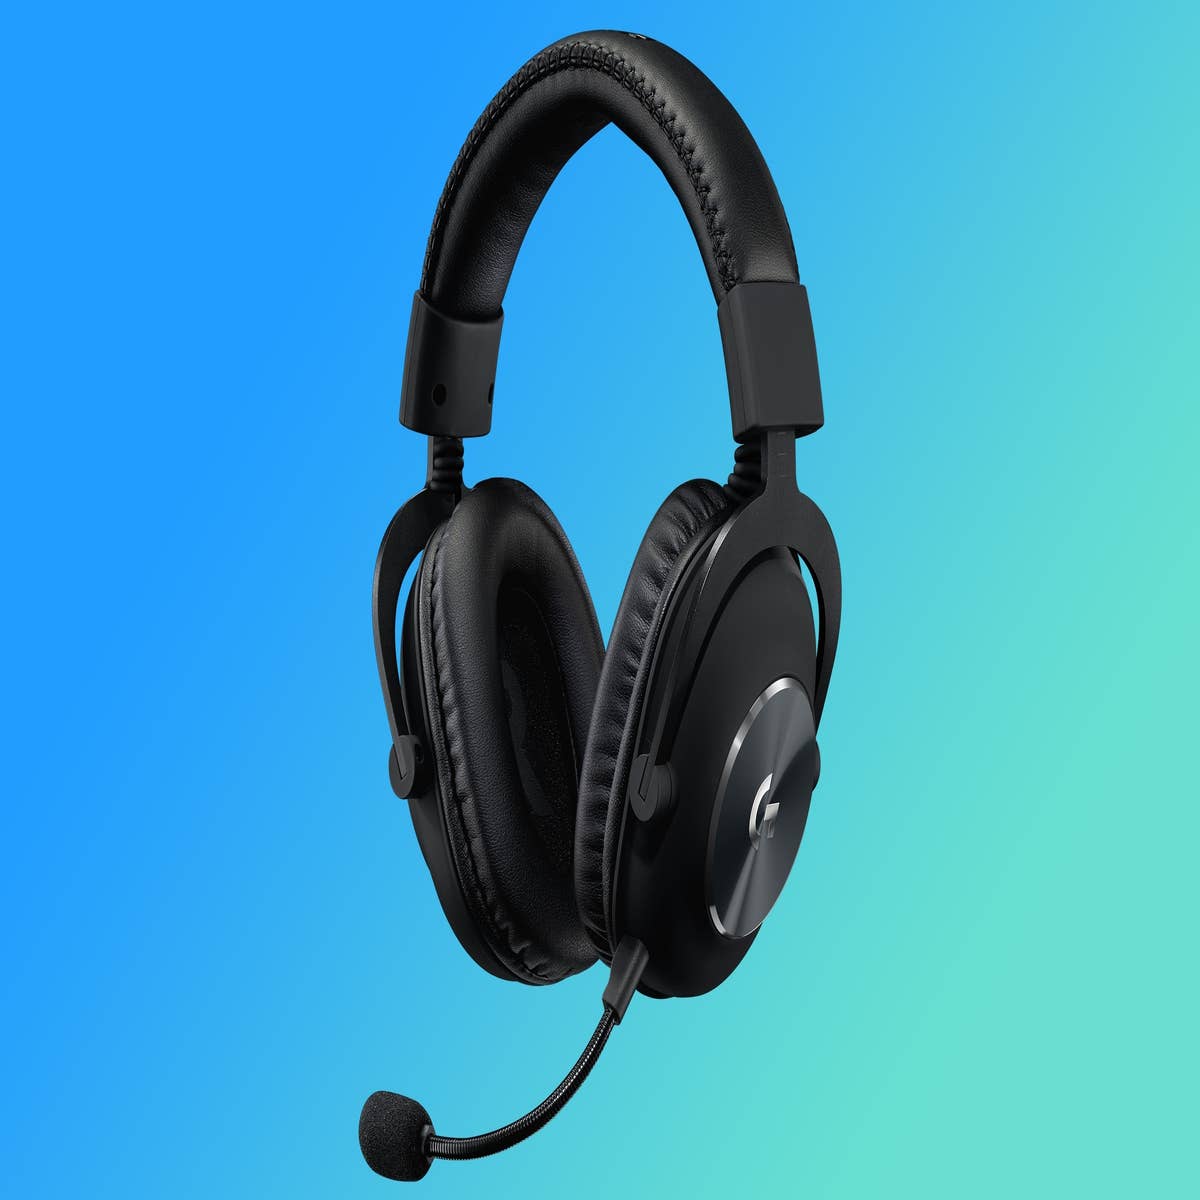 https://assetsio.reedpopcdn.com/best-pc-gaming-headset-our-recommended-wired-and-wireless-options-1622734103593.jpg?width=1200&height=1200&fit=bounds&quality=70&format=jpg&auto=webp